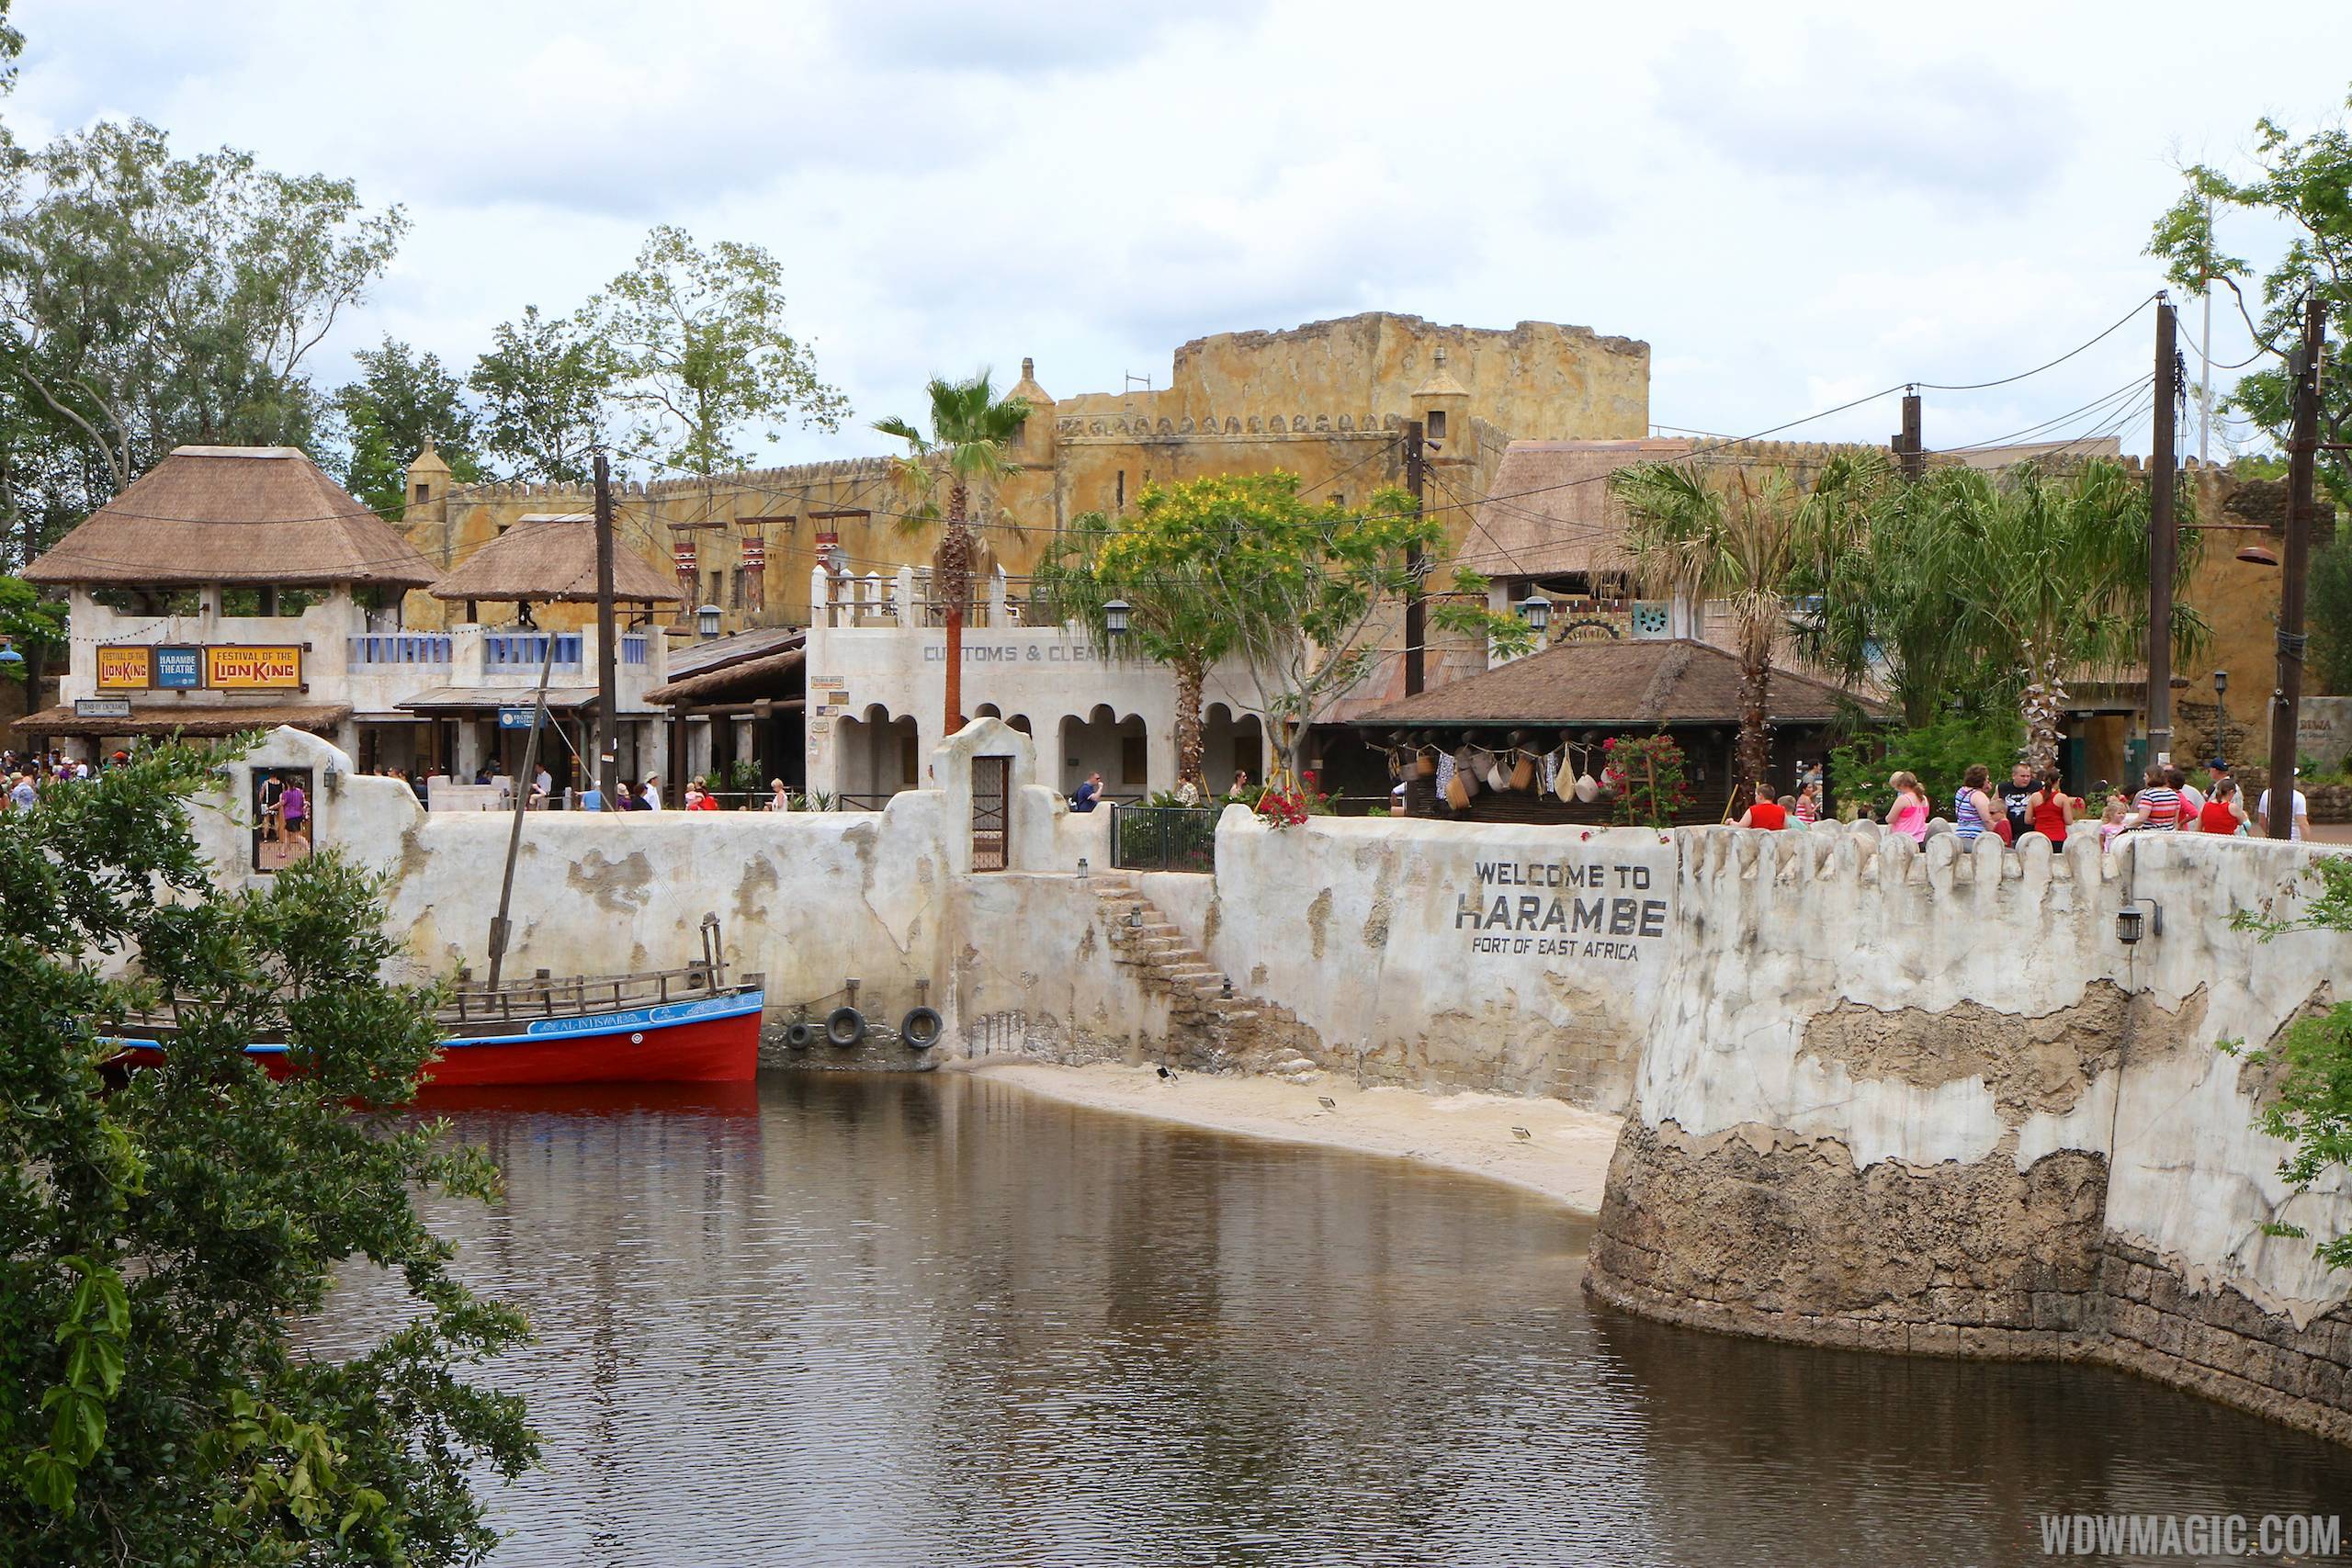 New Harambe Theatre area in Africa - View from Discovery Island bridge